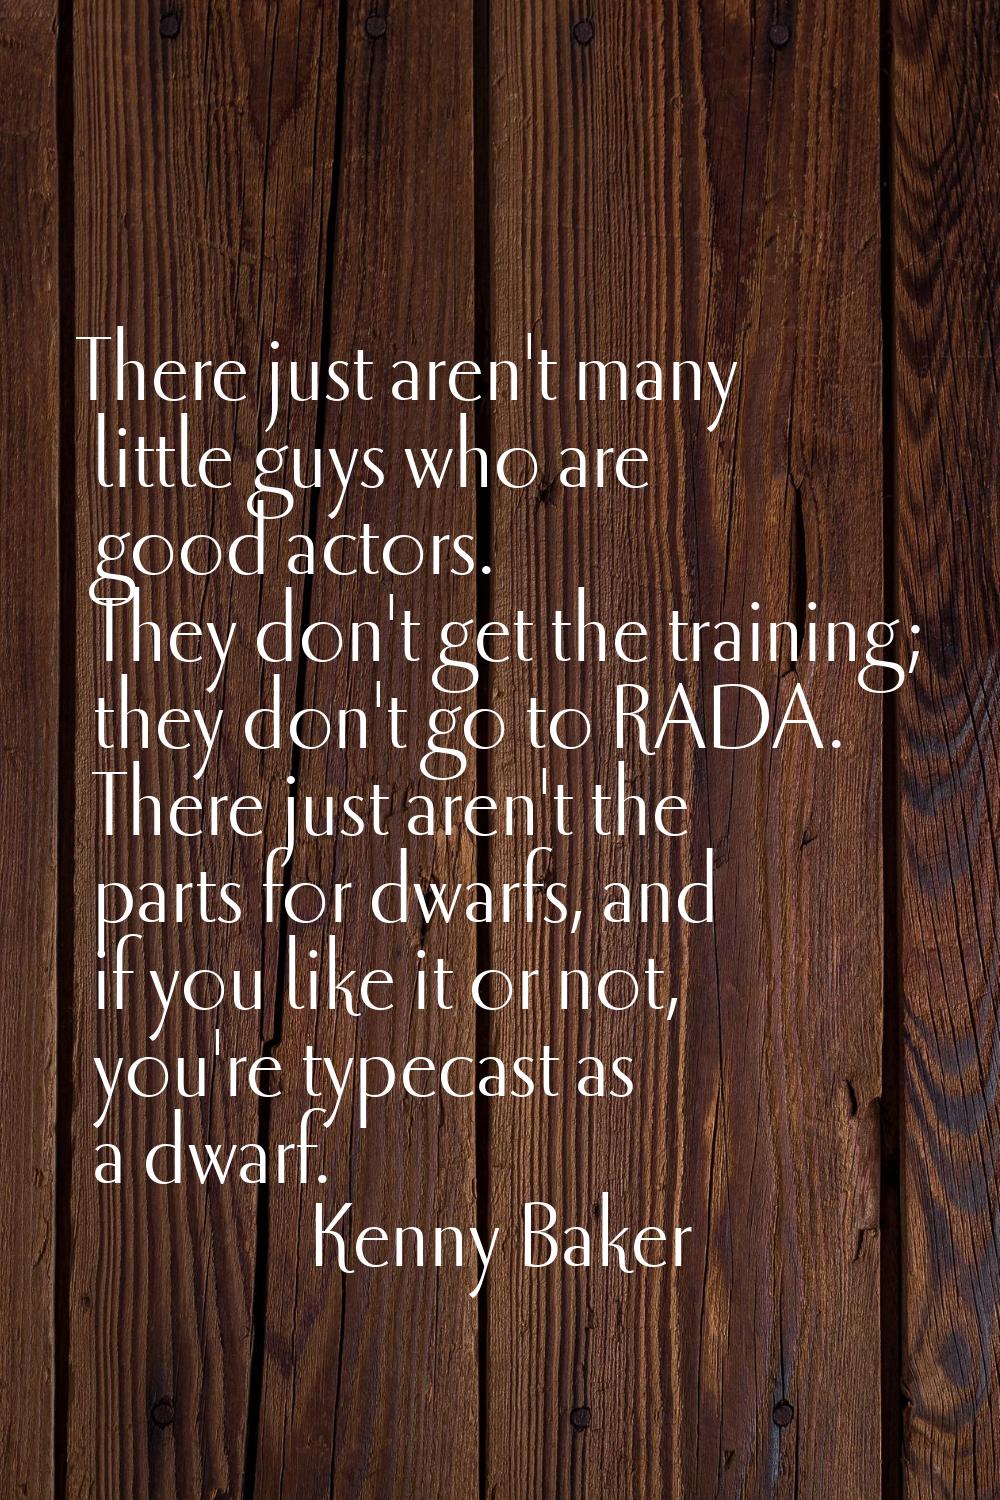 There just aren't many little guys who are good actors. They don't get the training; they don't go 